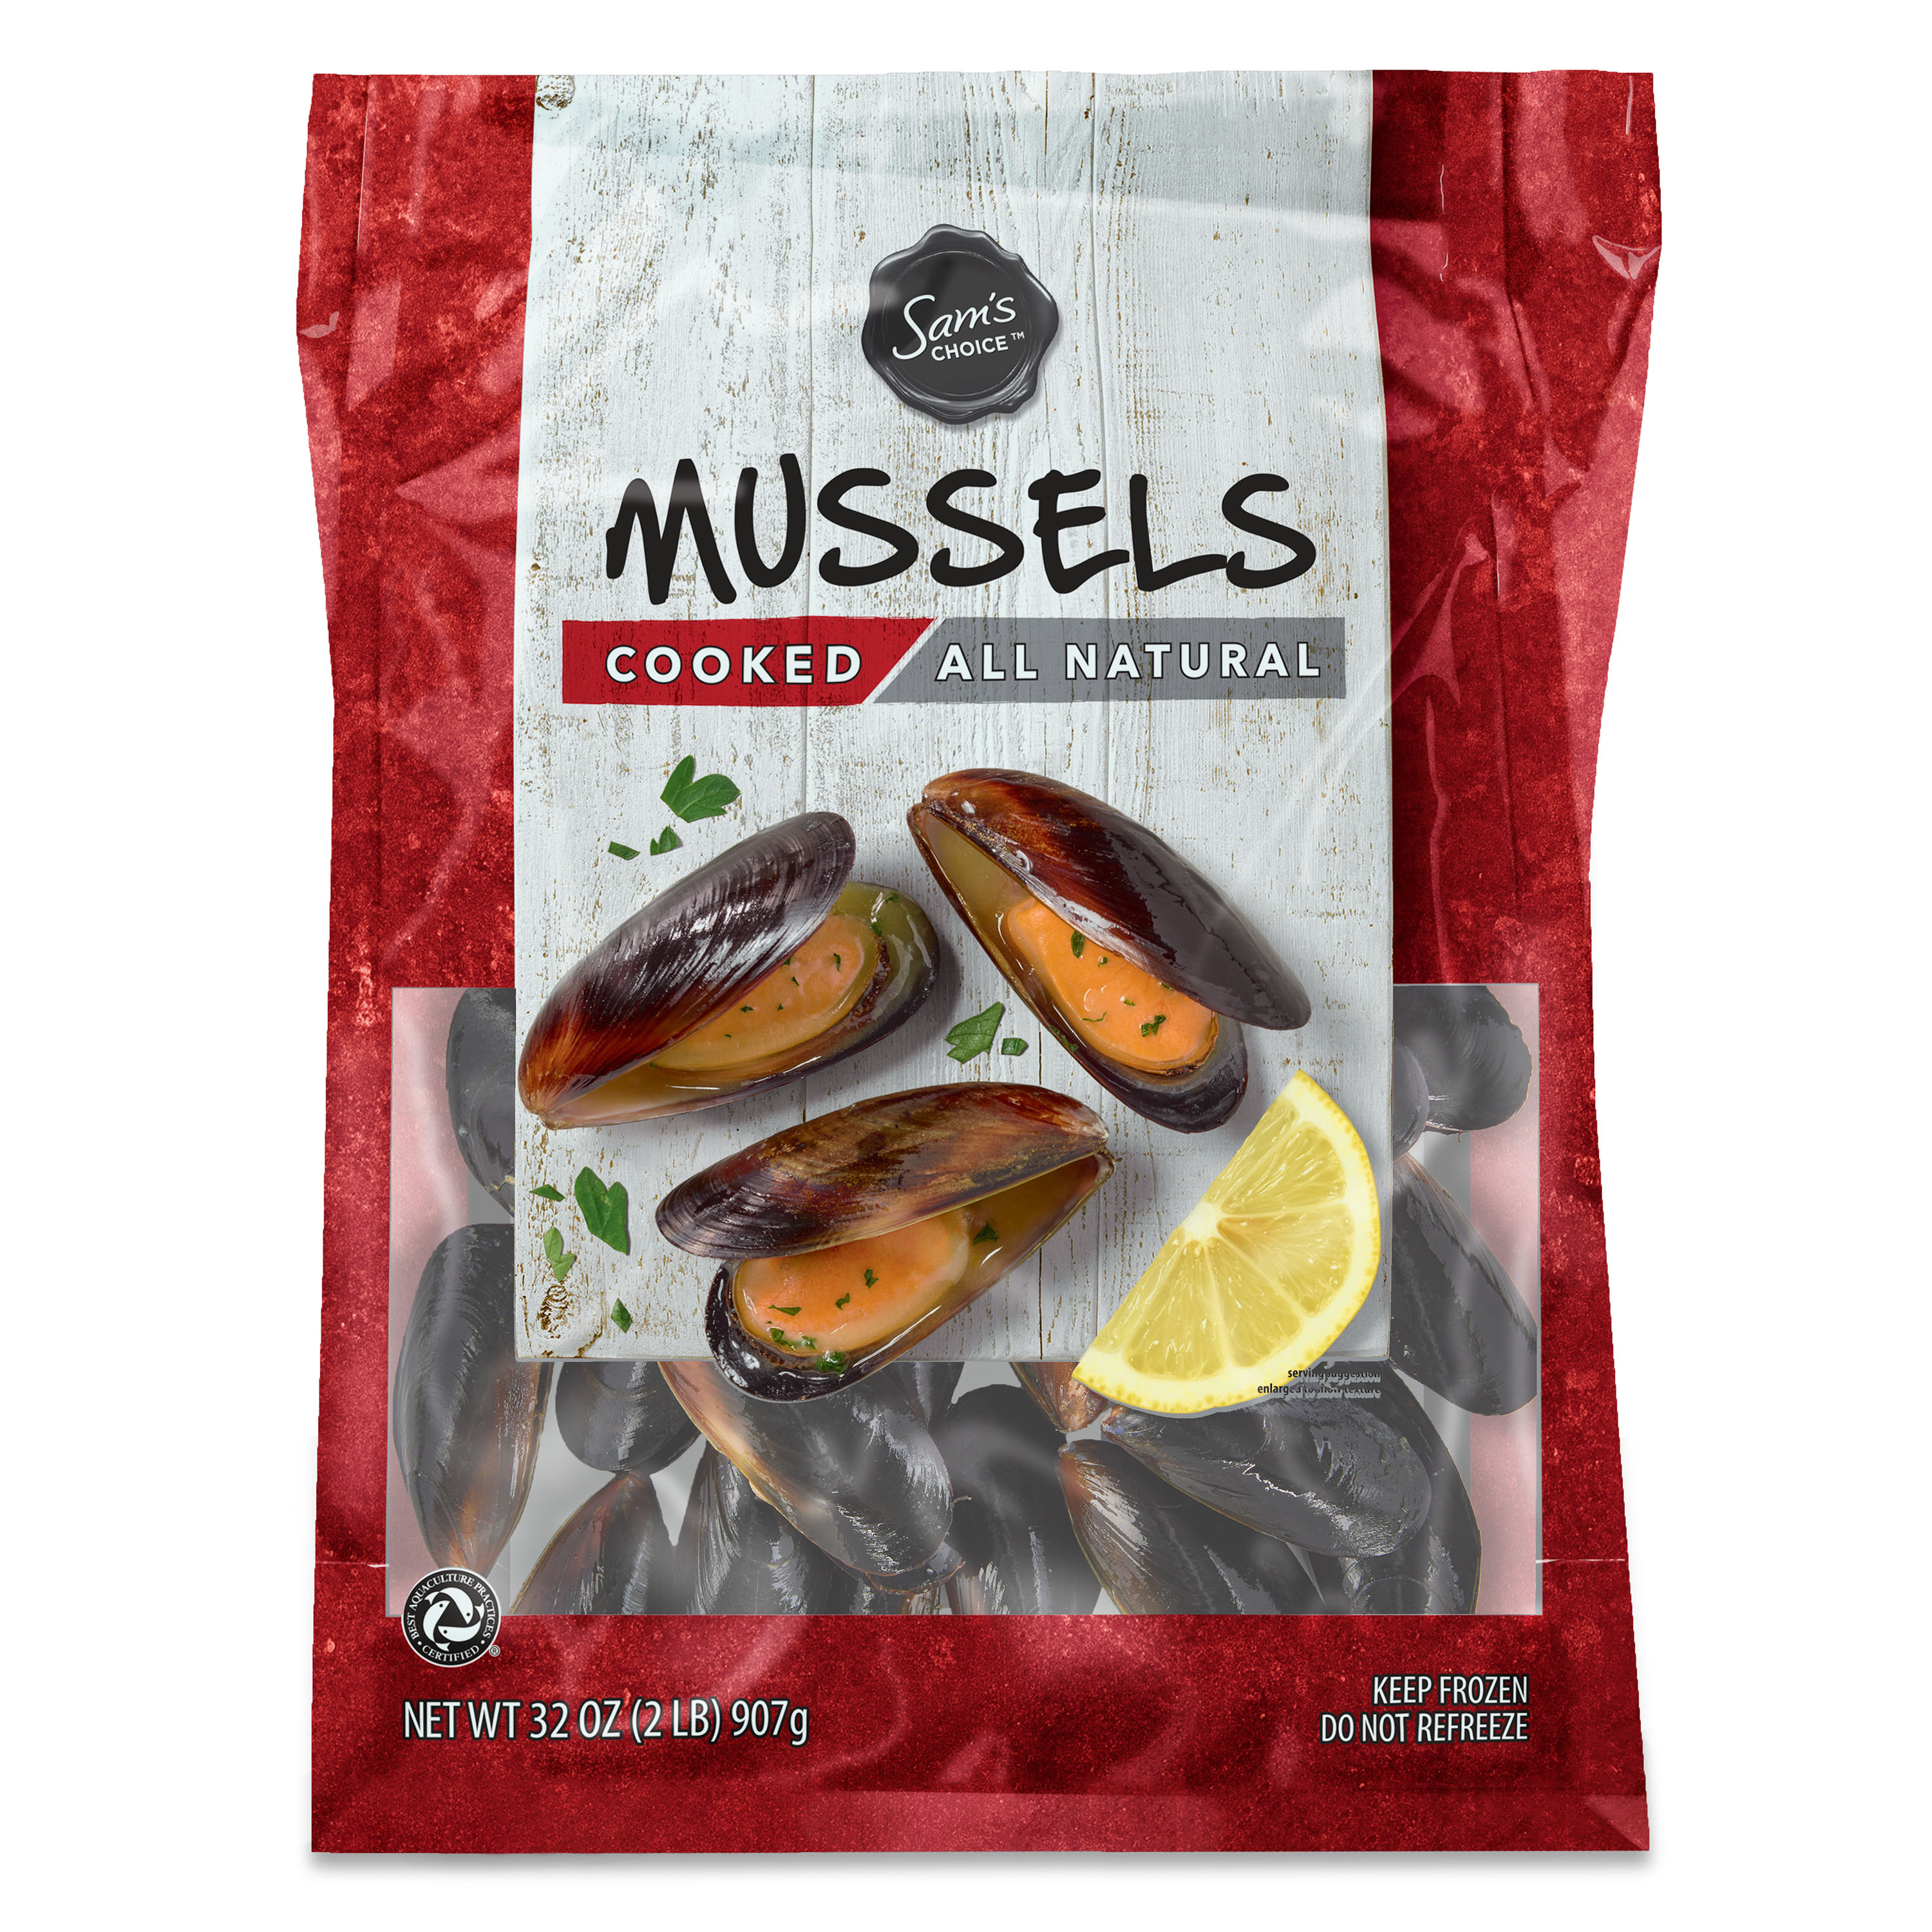 Sams Choice Frozen Mussels 2lb - image 2 of 9